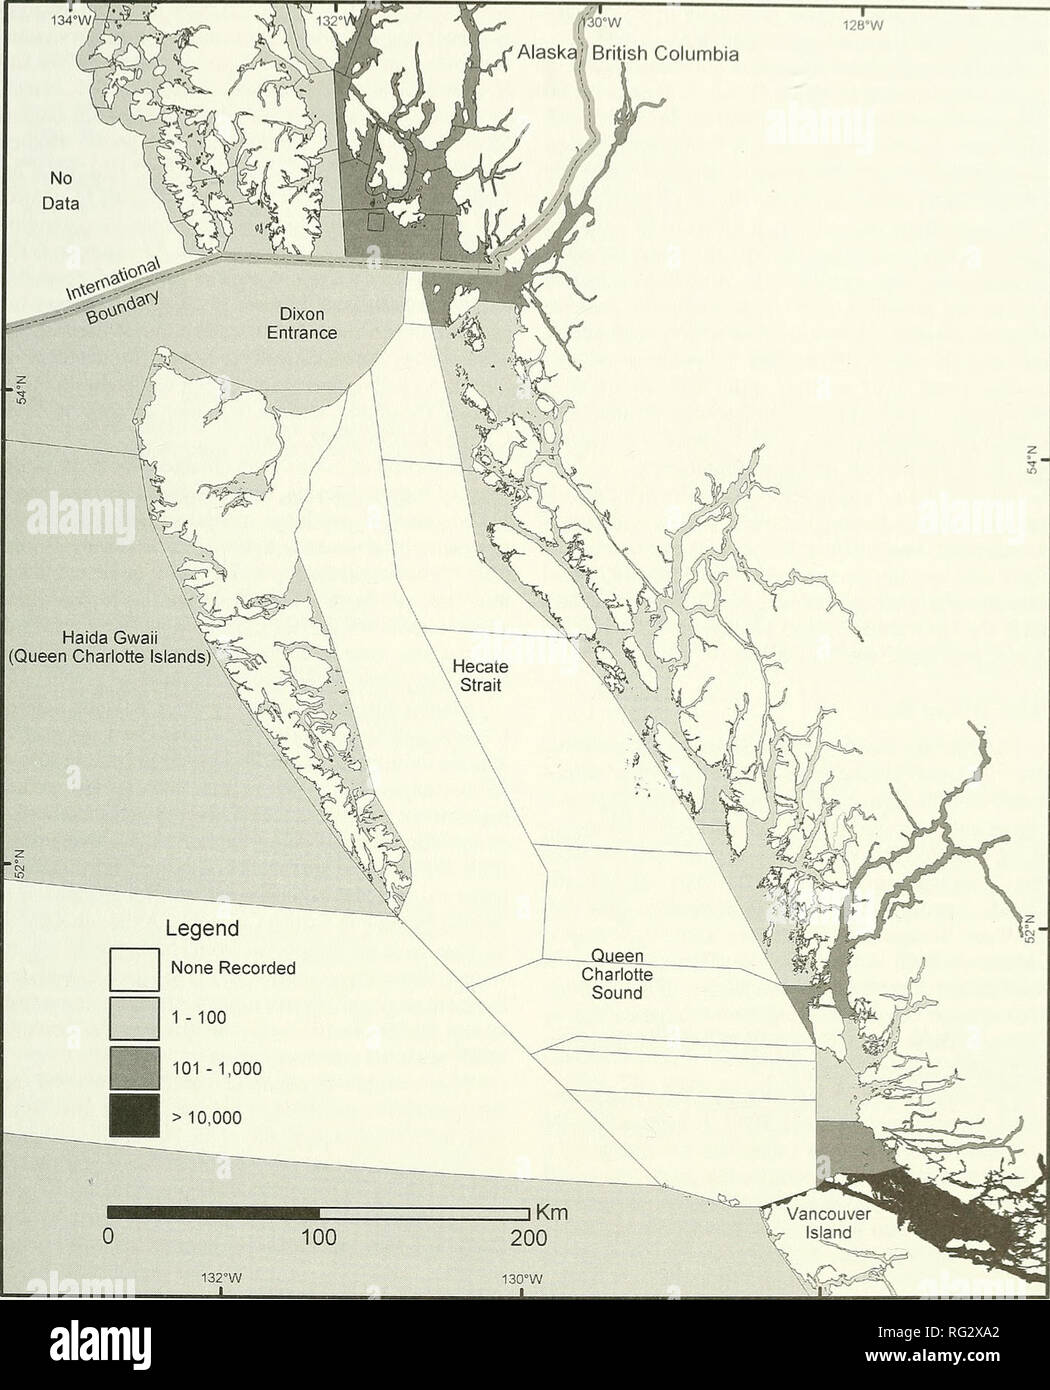 . The Canadian field-naturalist. 2004 Sloan and Bartier: Introduced Marine Species 81 TT— —1 12b-W /Alaska,' British Columbia. 132°W t  Figure 2. Map of the northern British Columbia and southeast Alaska regions showing the density of Atlantic salmon obser- vations. All data are from Fisheries and Oceans Canada's Atlantic Salmon Watch Program: www.pac.dfo-mpo.gc. ca/sci/aqua/ASWP e.htm. [accessed May, 2004]. British Columbia data are from 1987 to 2002 and partitioned according to Pacific Fishery Management Areas, and the Alaska data are from 1990 to 2002 and partitioned according to the Alaska Stock Photo